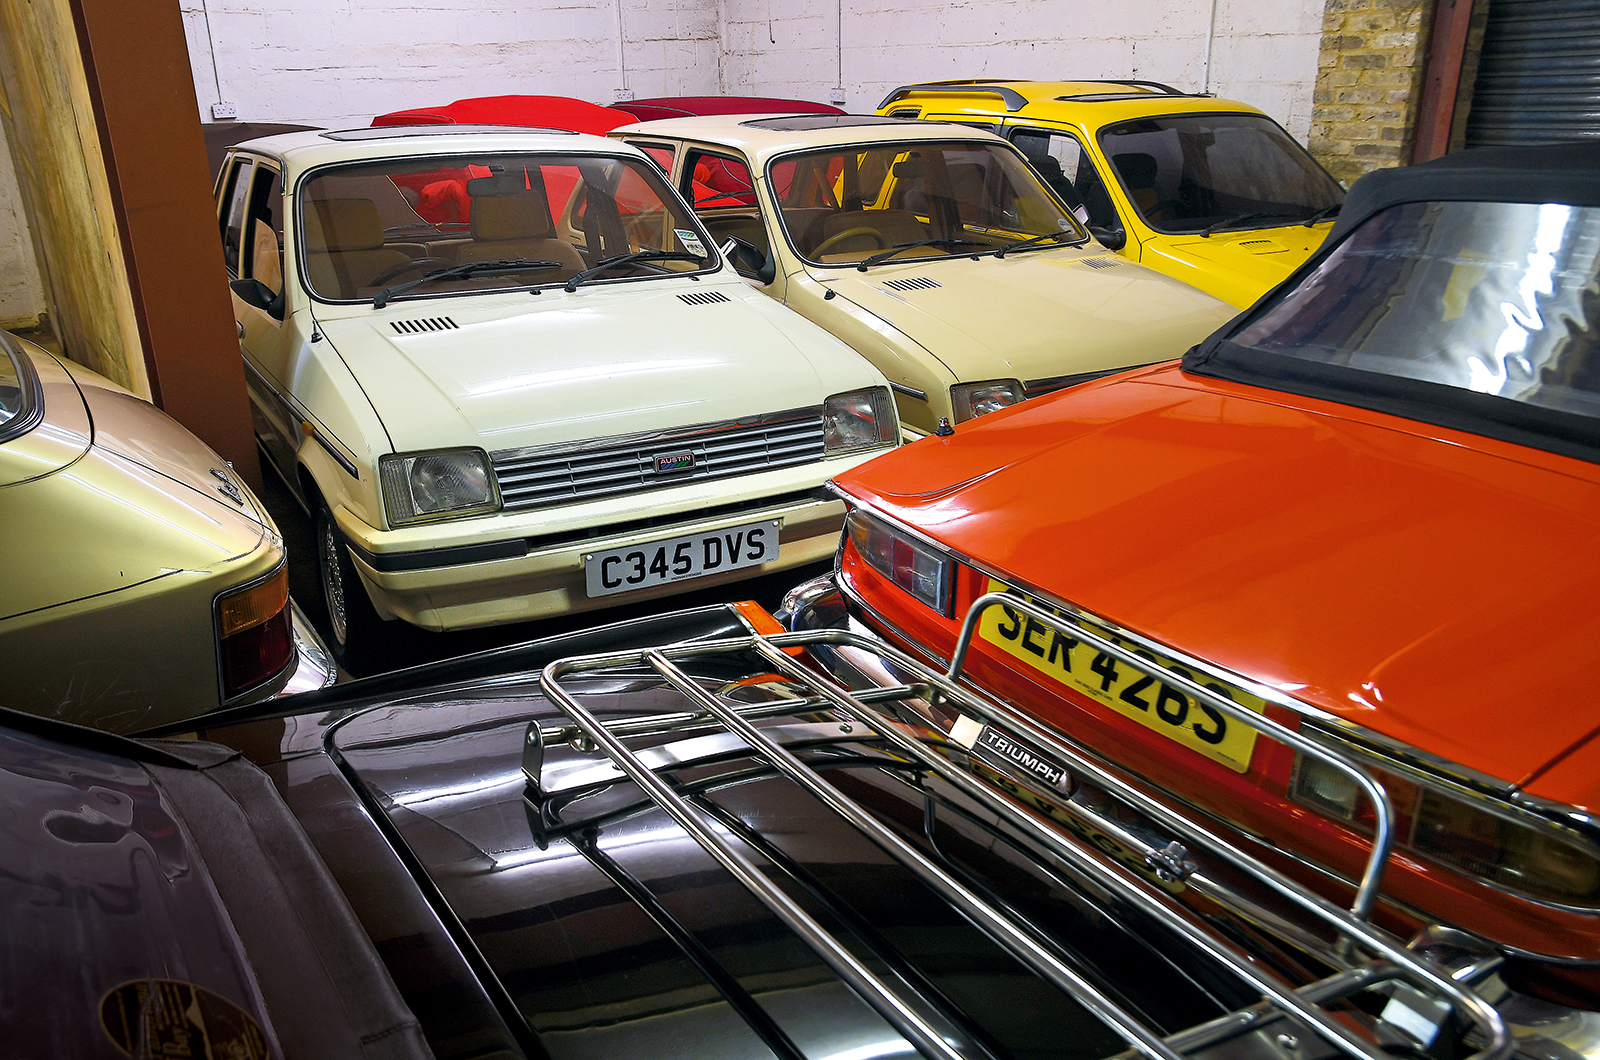 Classic & Sports Car – For the love of British Leyland